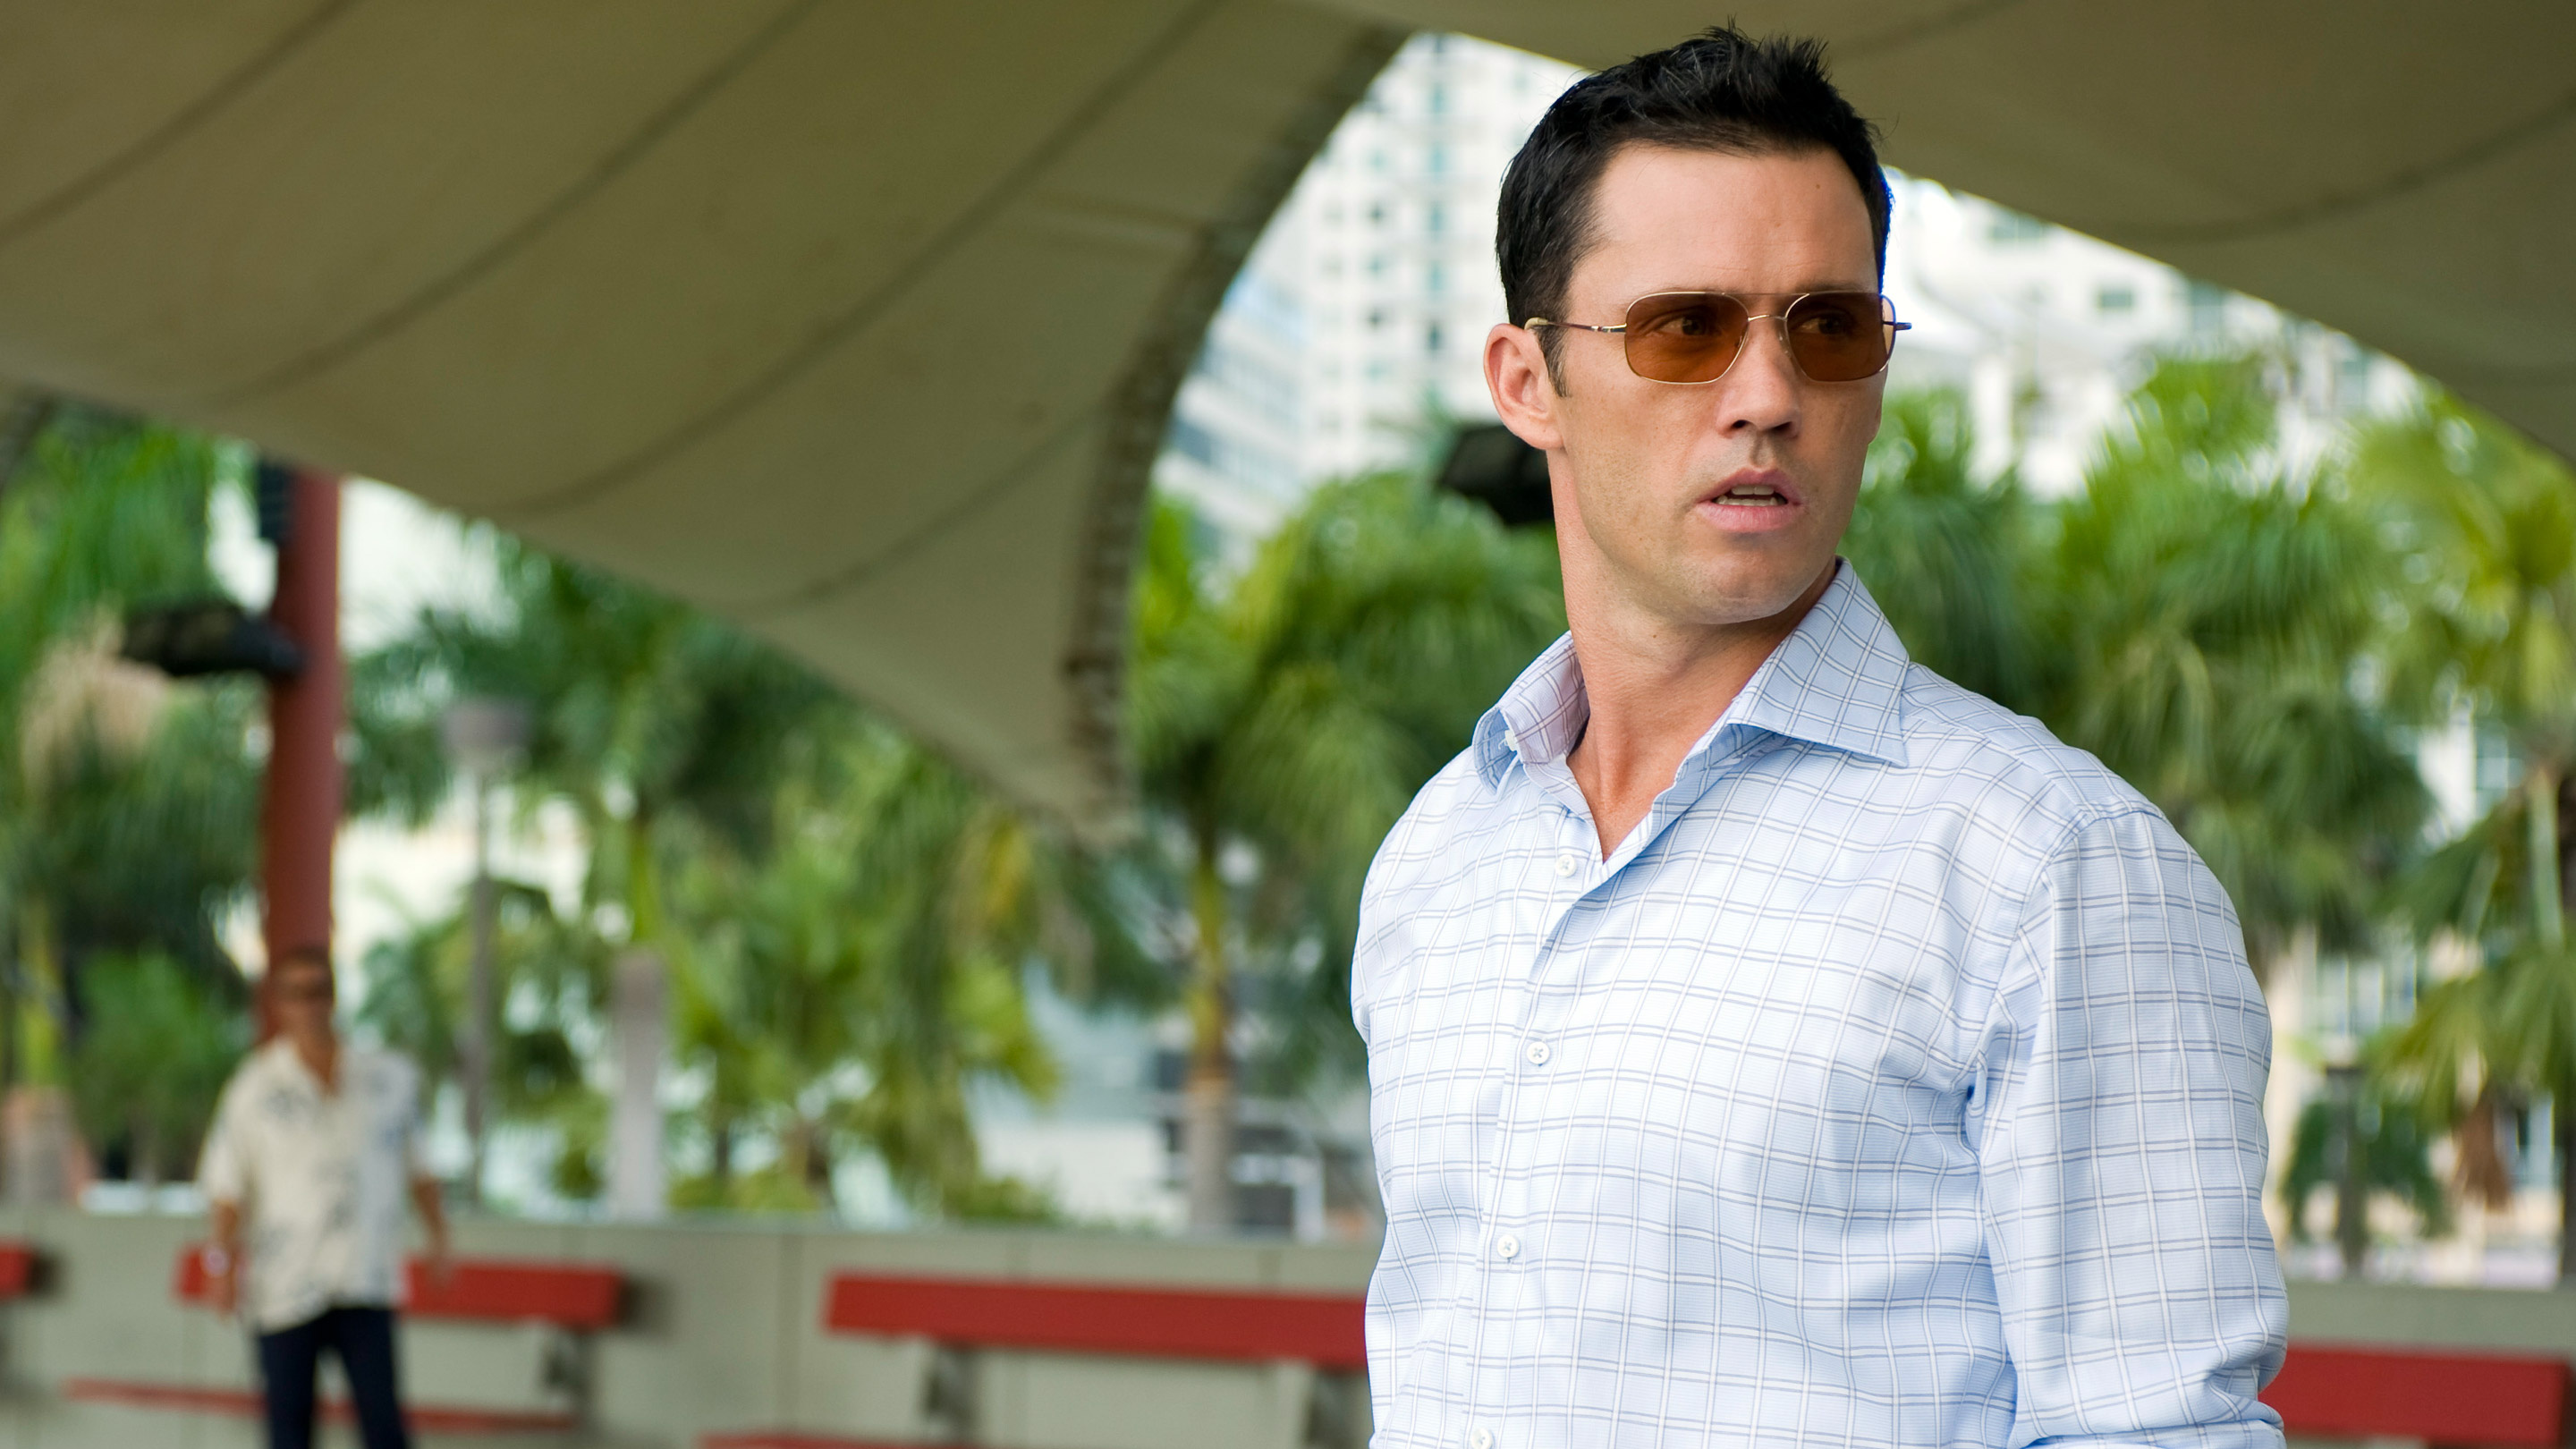 Amazing Burn Notice Pictures & Backgrounds